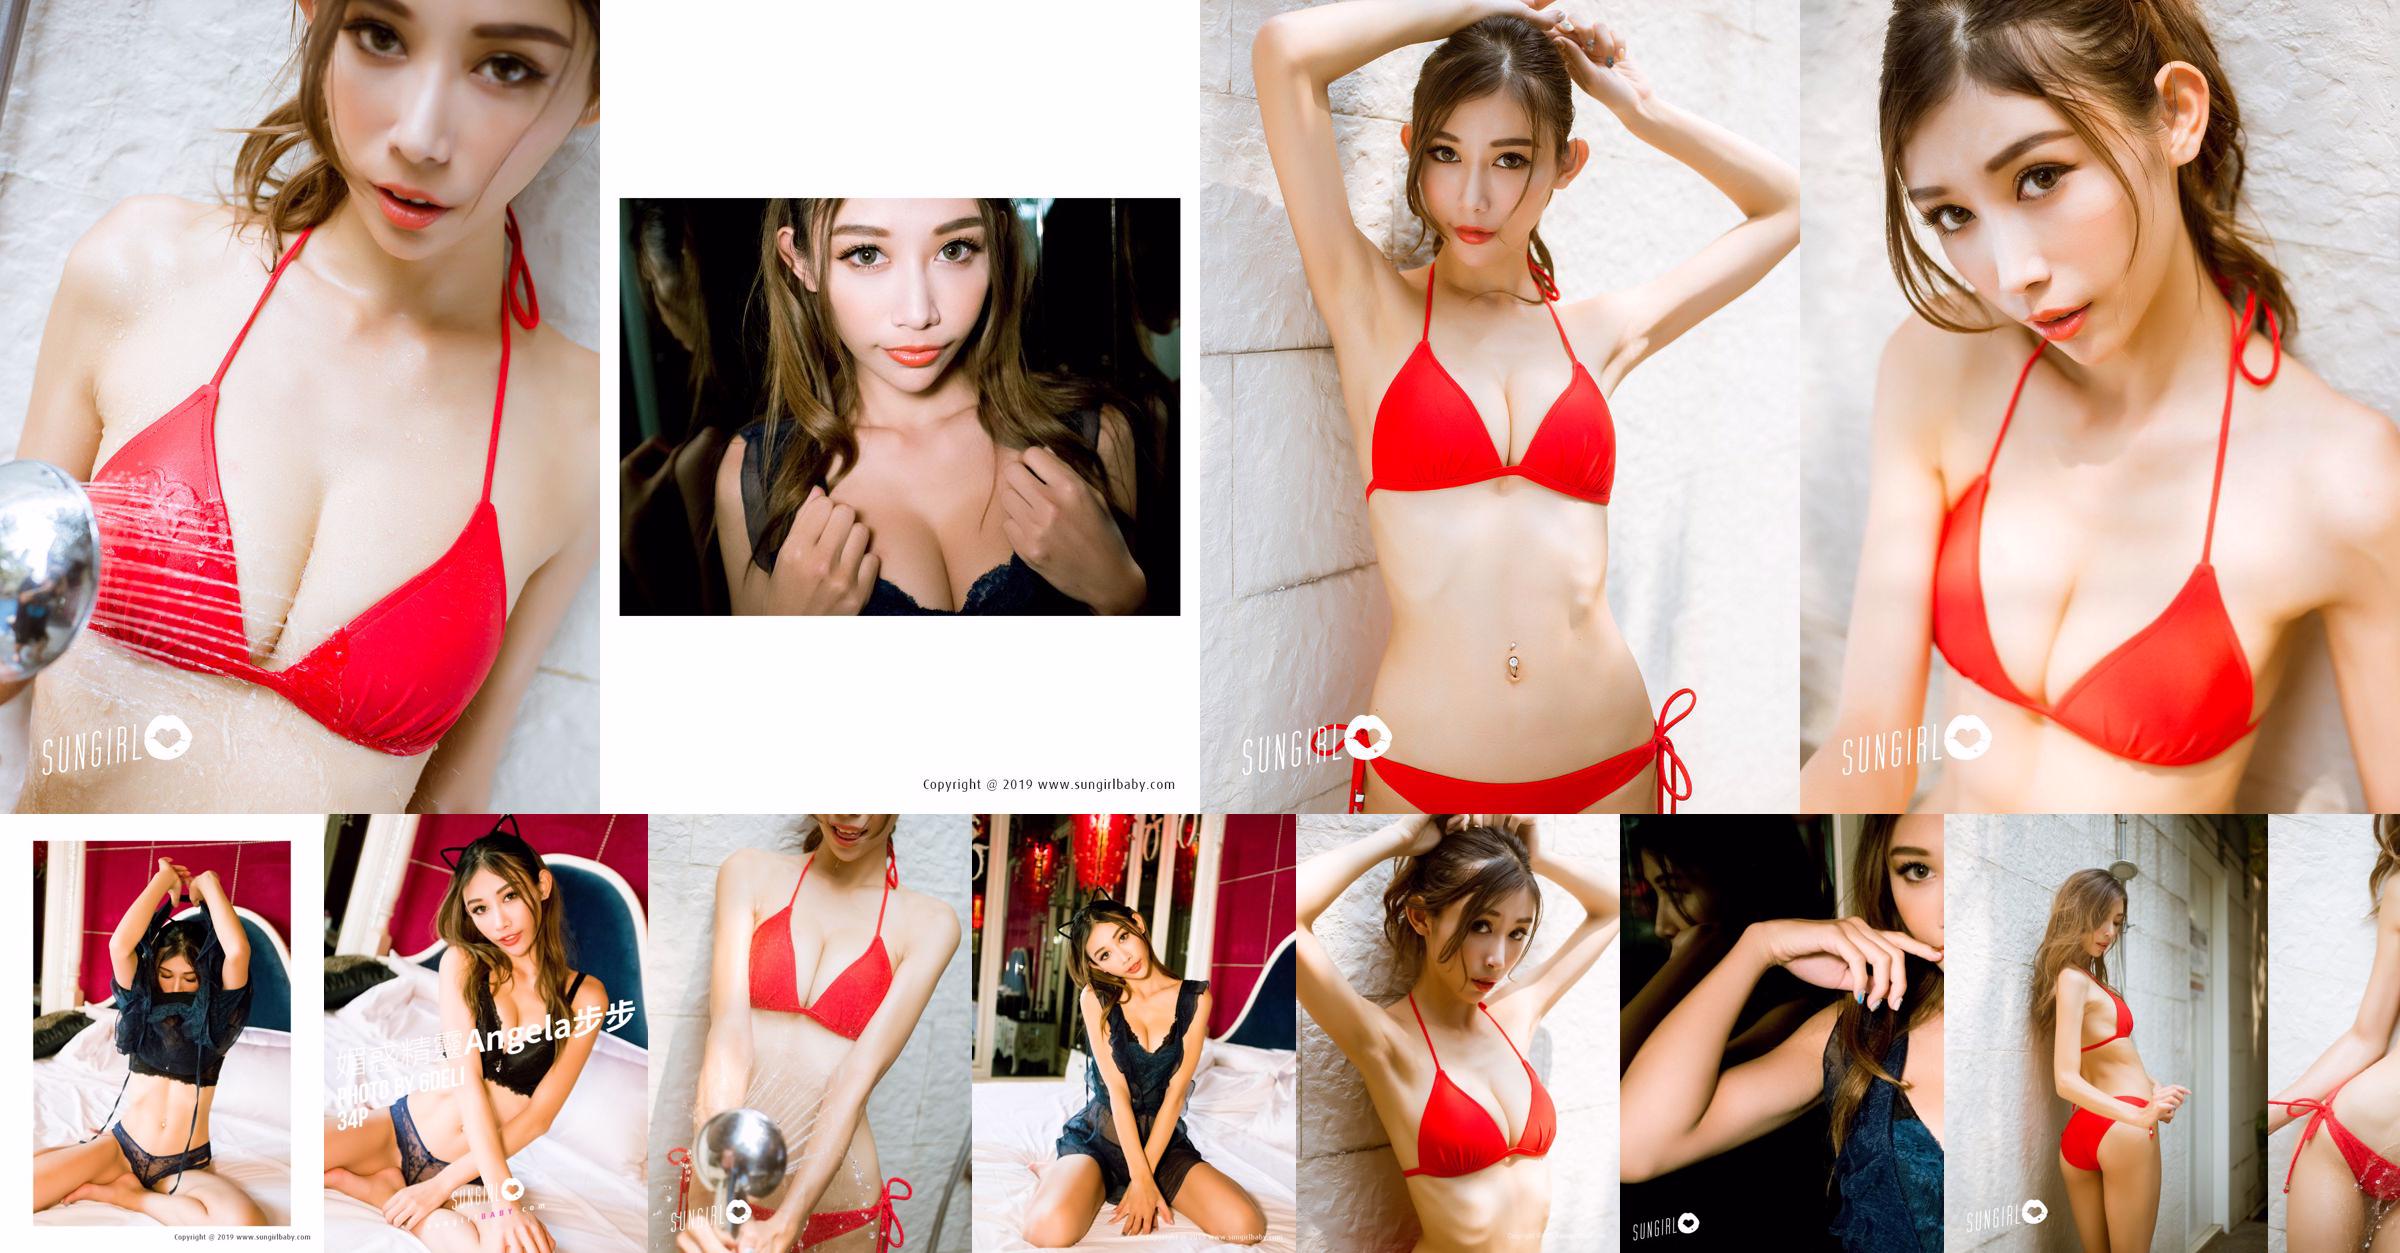 Step by step Angela "Super Jiefang Water Works" [Sunshine Baby SUNGIRL] No.008 No.75c5fd Page 3